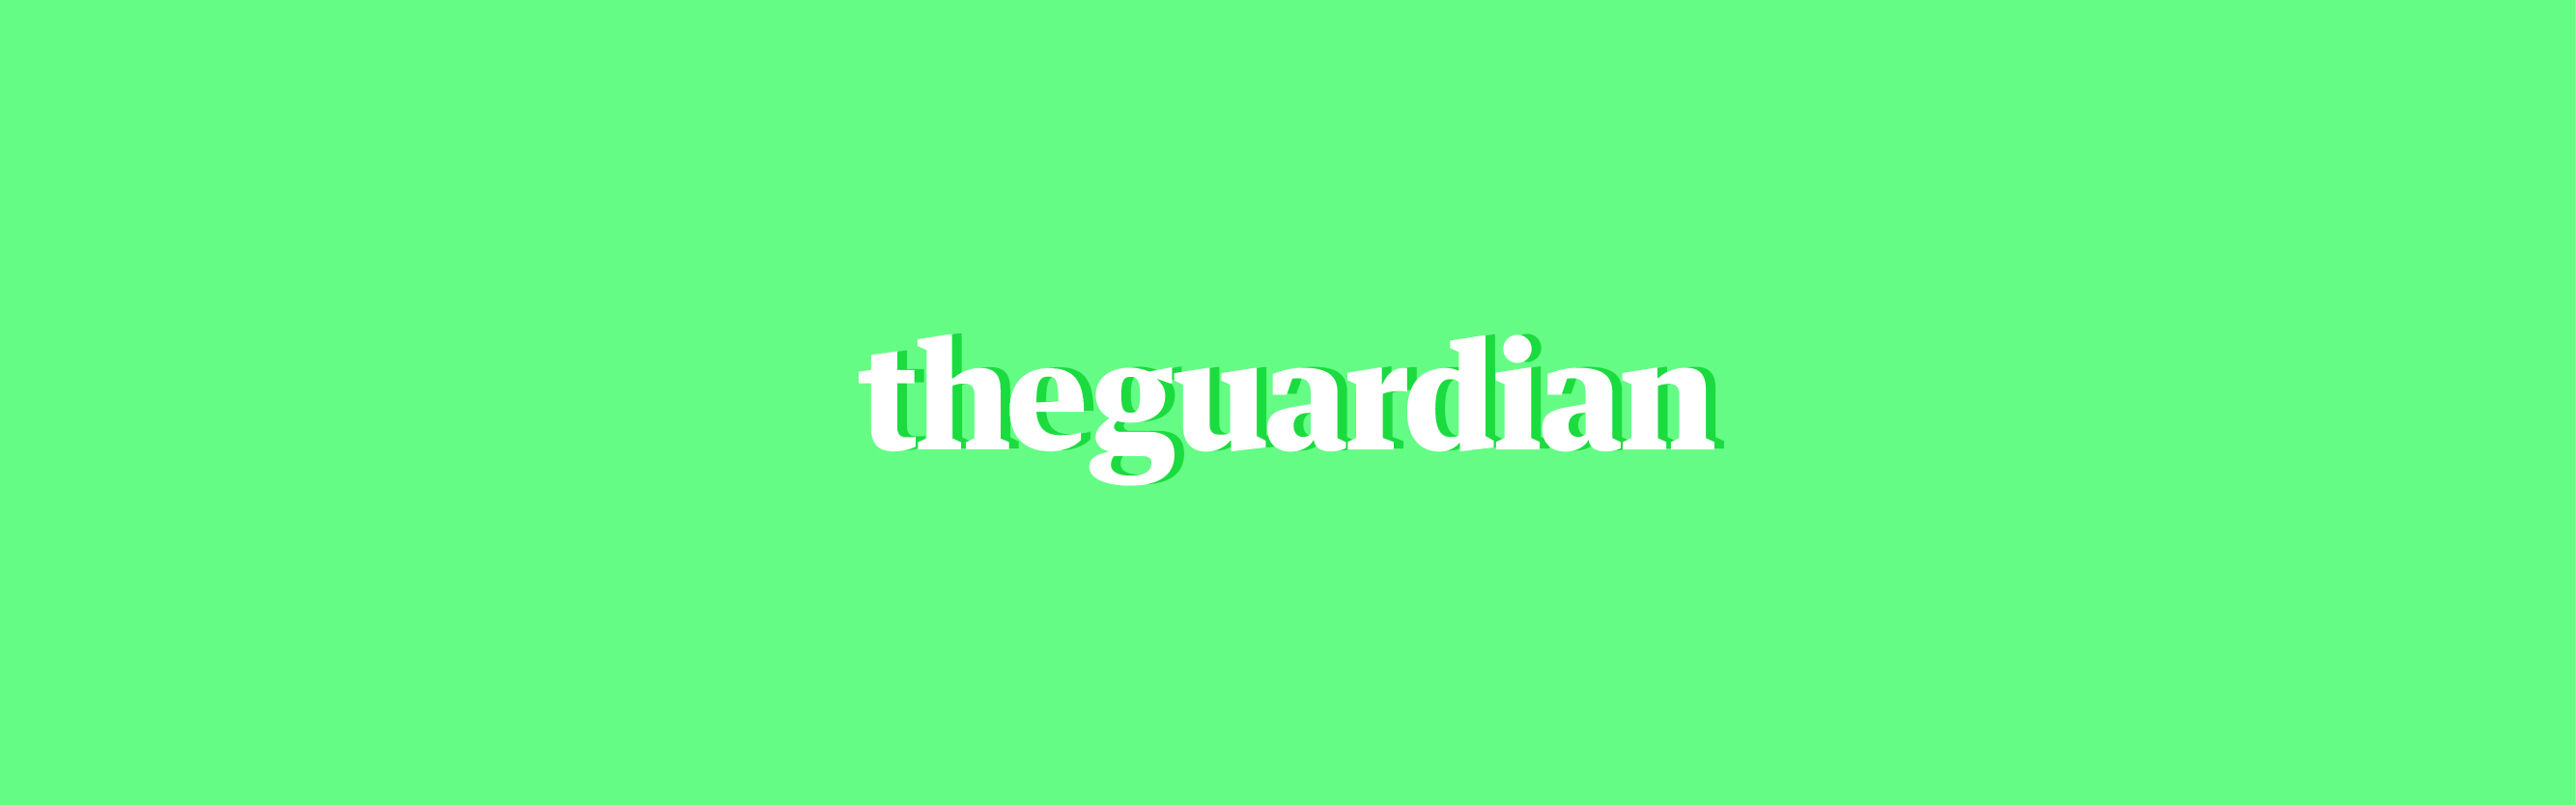 The Guardian News Content Breakdown, March 2016